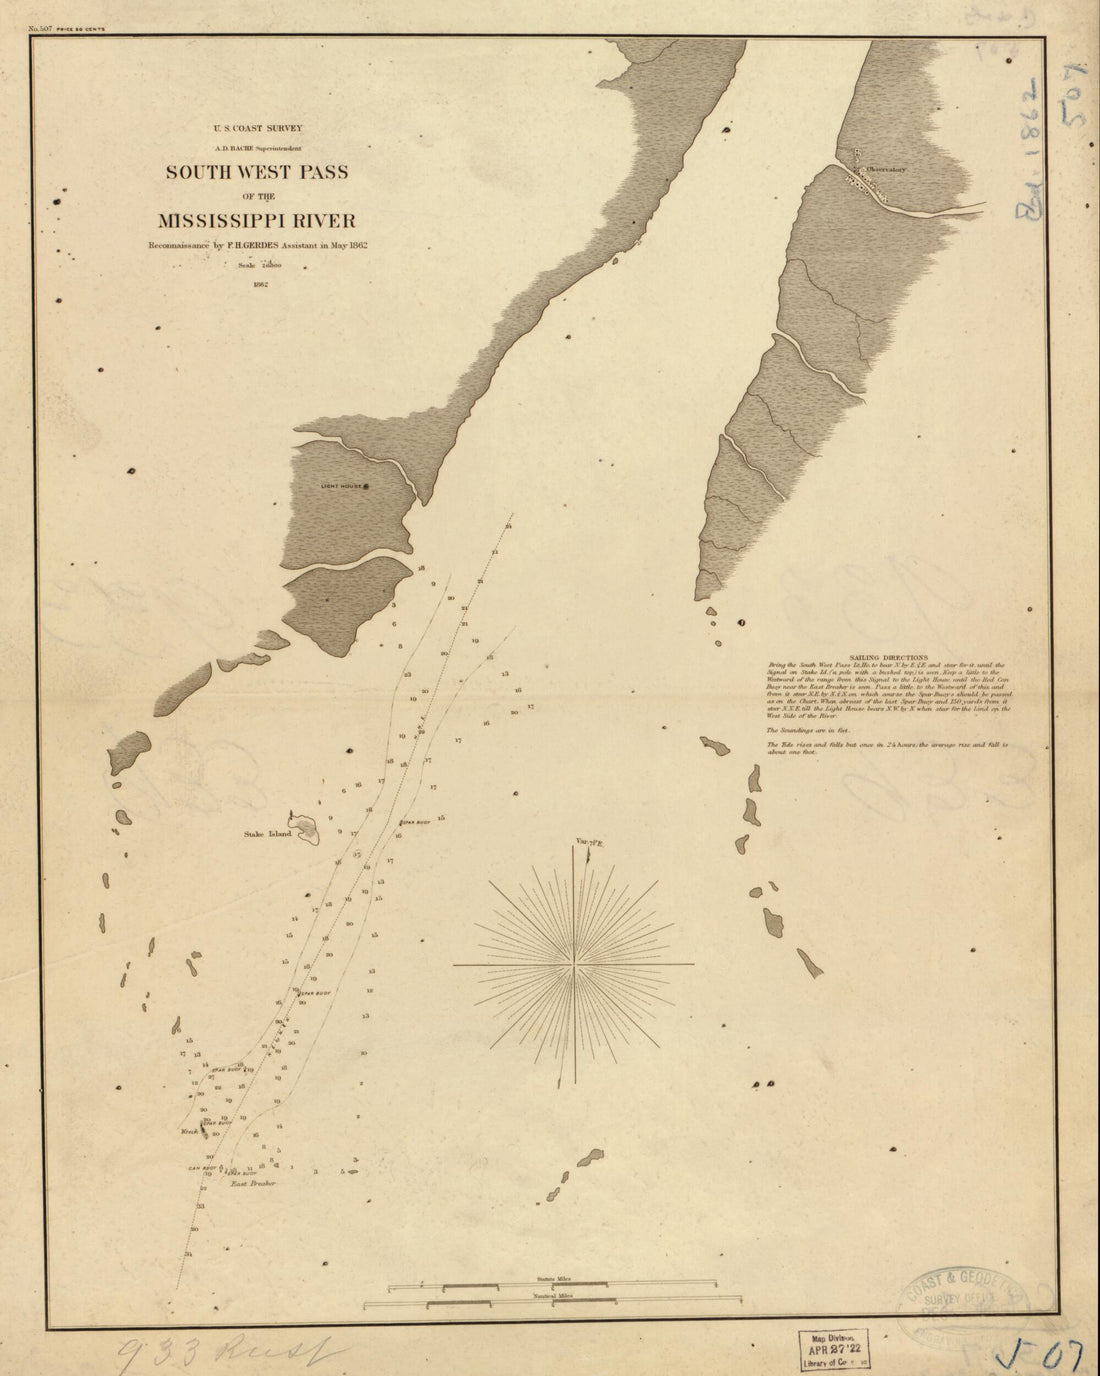 This old map of South West Pass of the Mississippi River from 1862 was created by A. D. (Alexander Dallas) Bache, F. H. Gerdes,  United States Coast Survey in 1862